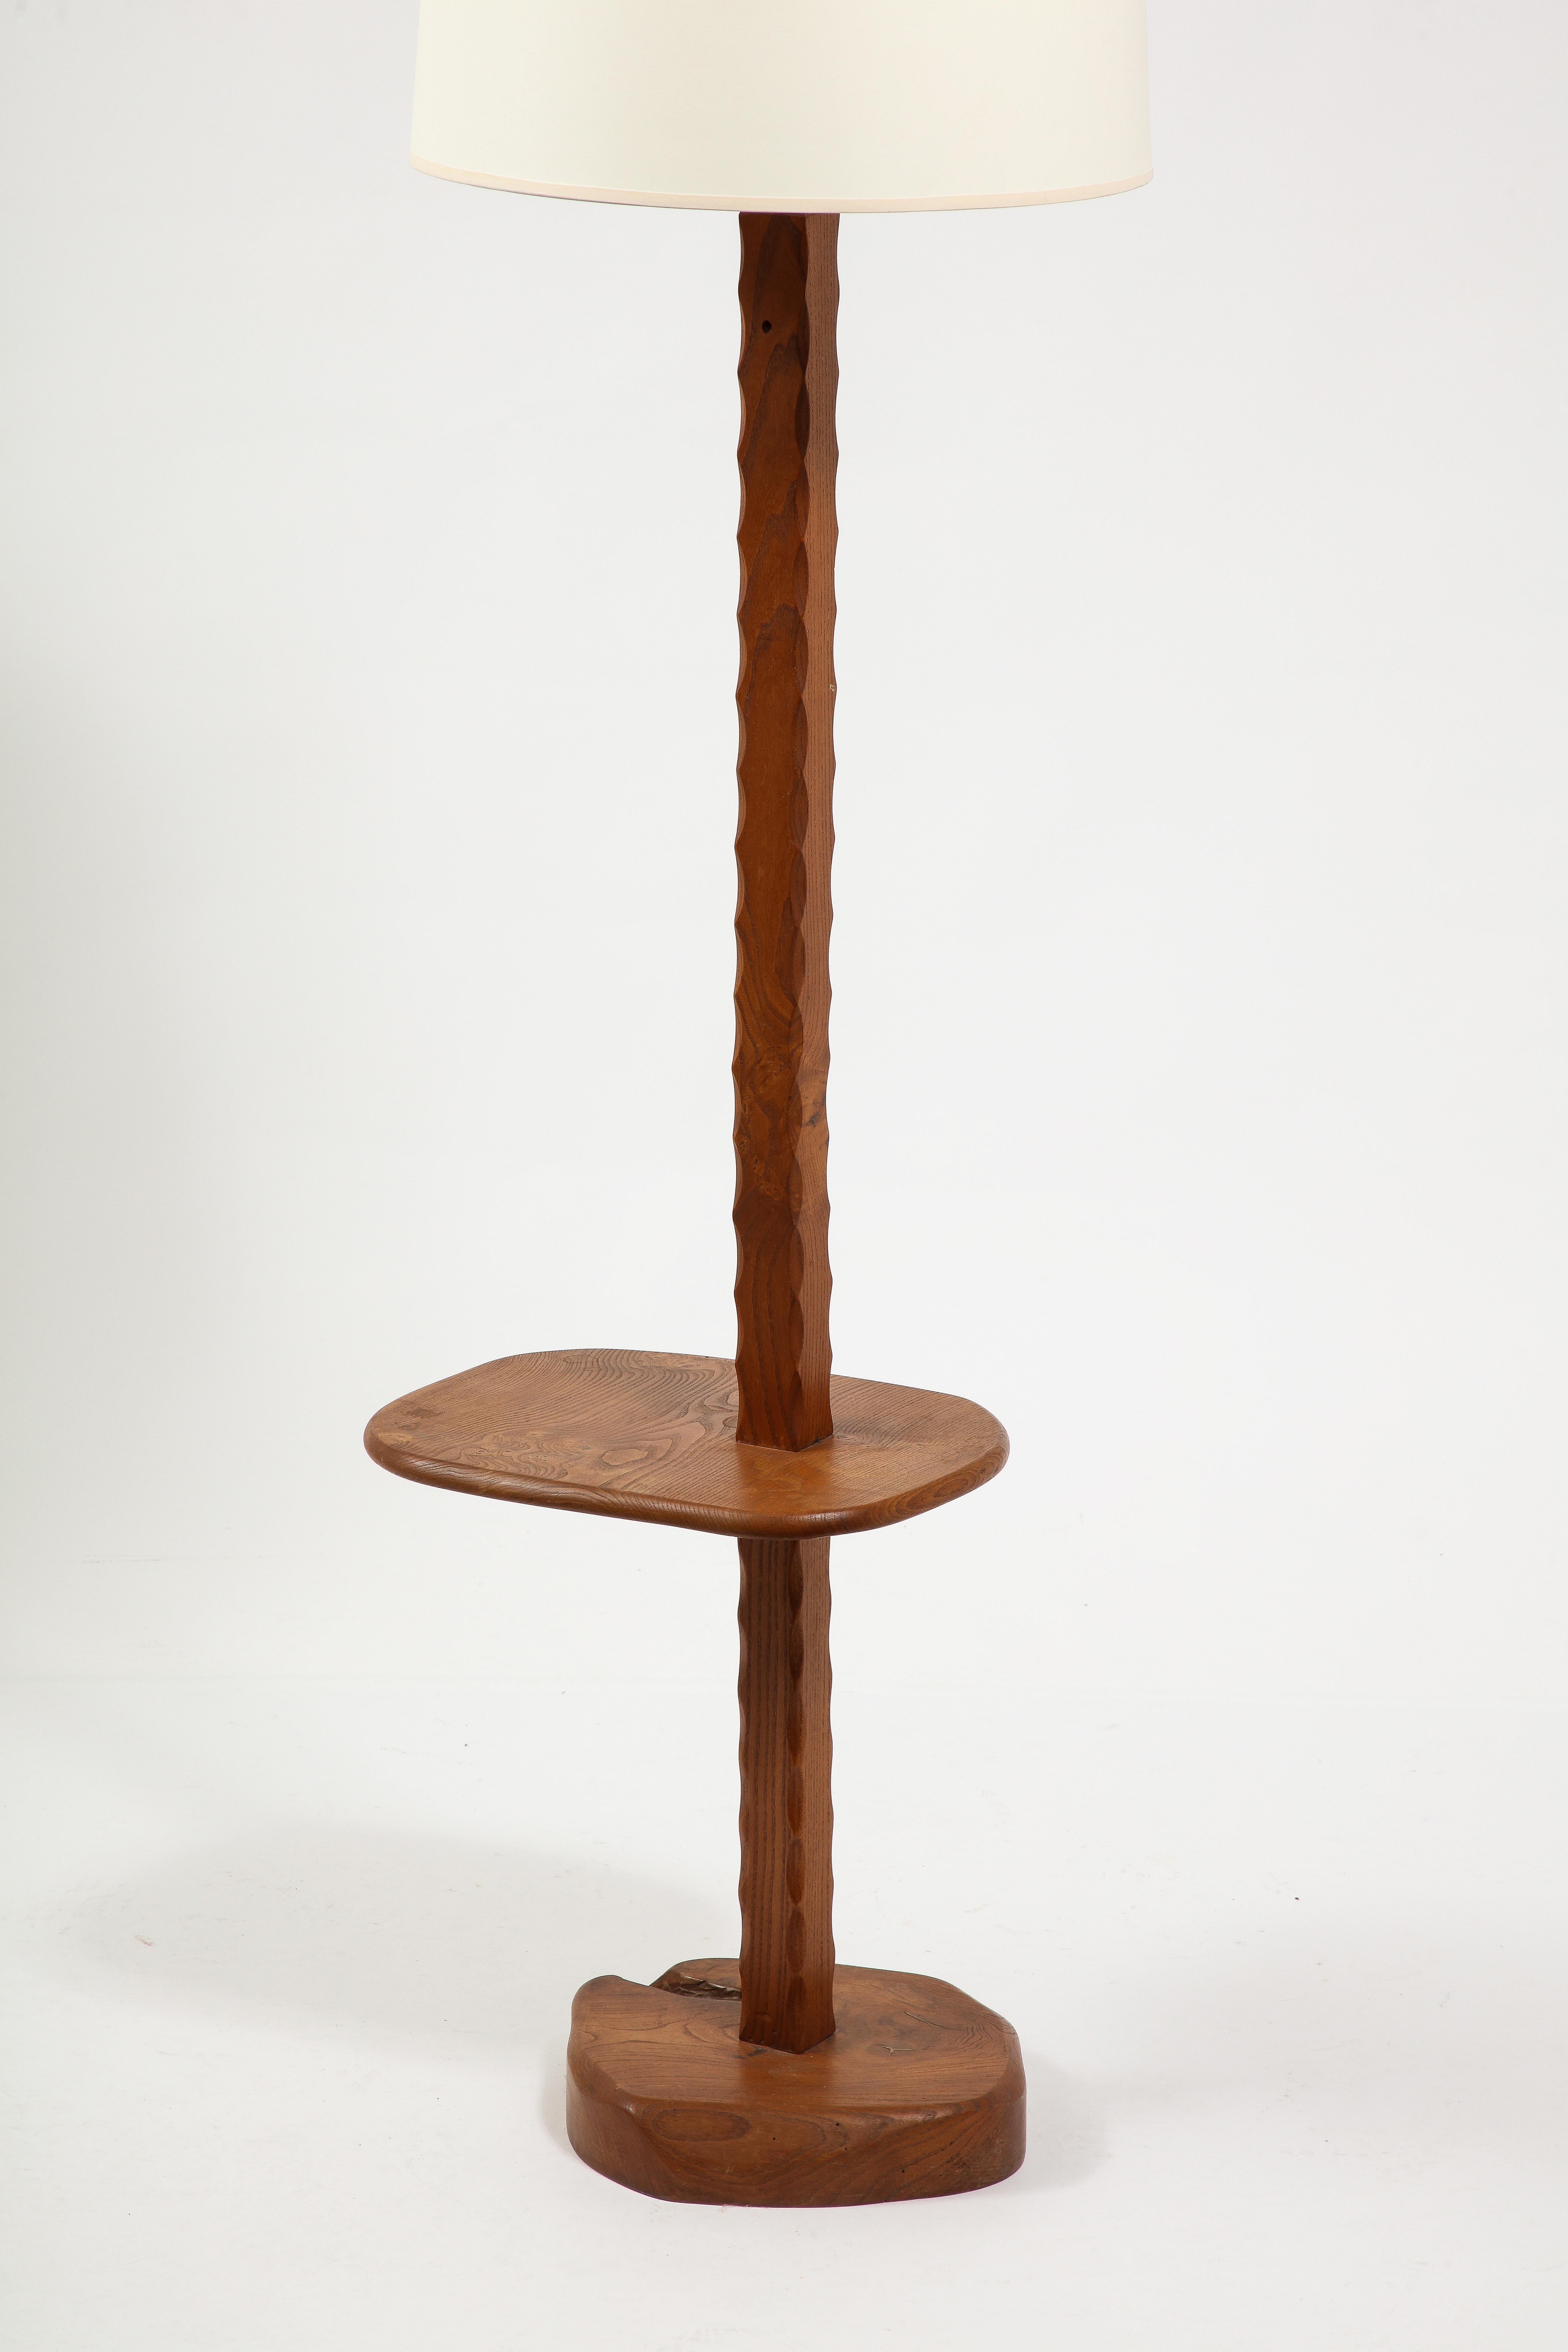 Solid Elm Floor Lamp With Shelf, France 1950's For Sale 7